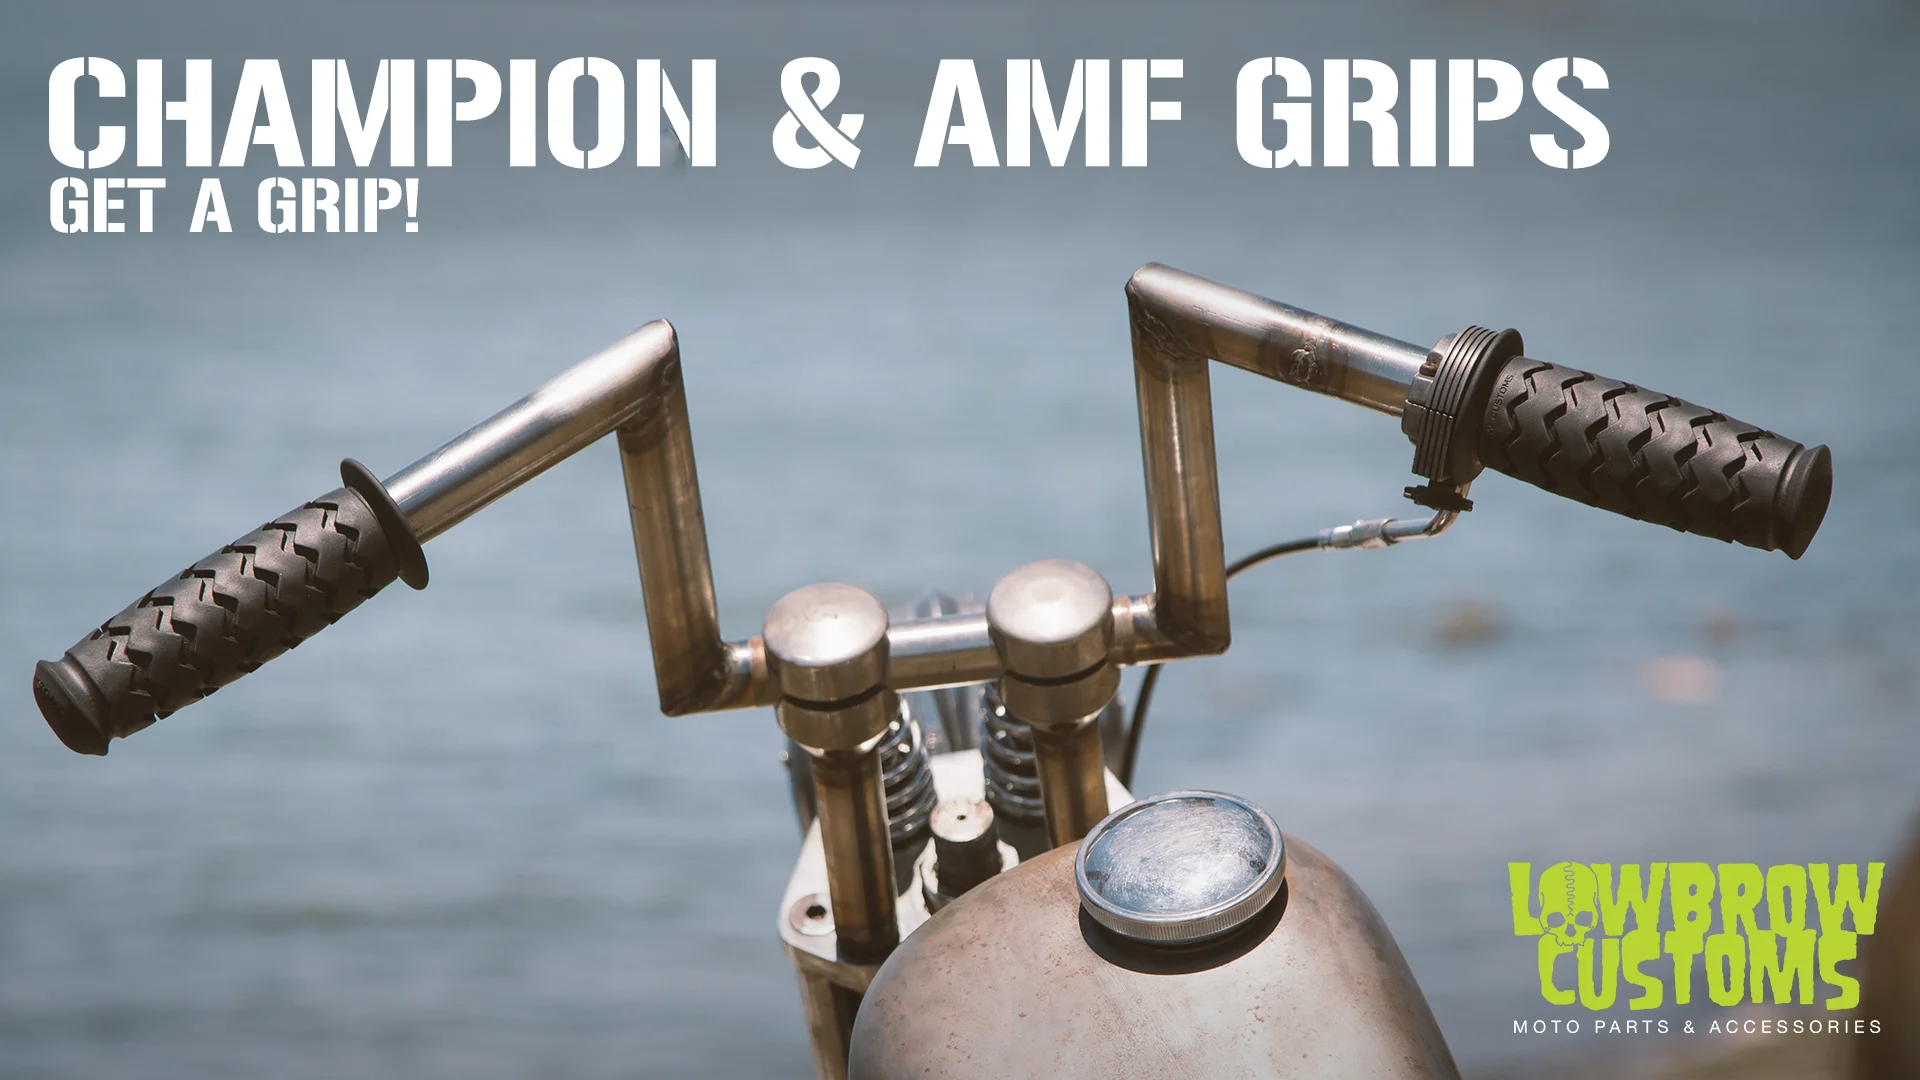 Lowbrow Customs Champion & AMF Motorcycle Grips Coming Out Soon